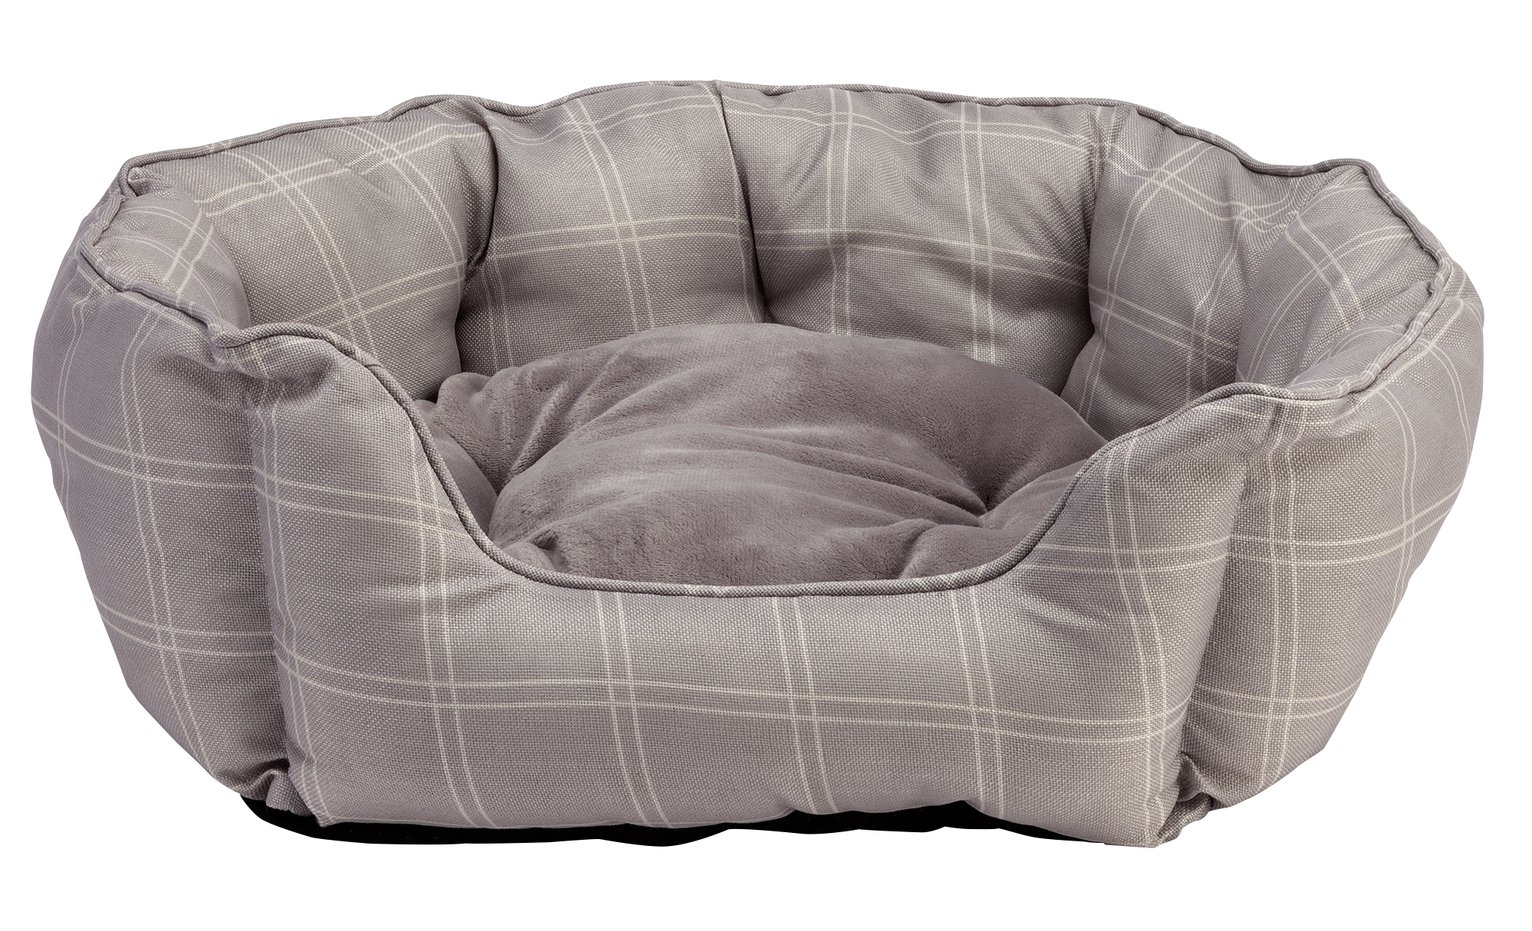 Country Check Oval Pet Bed - Large